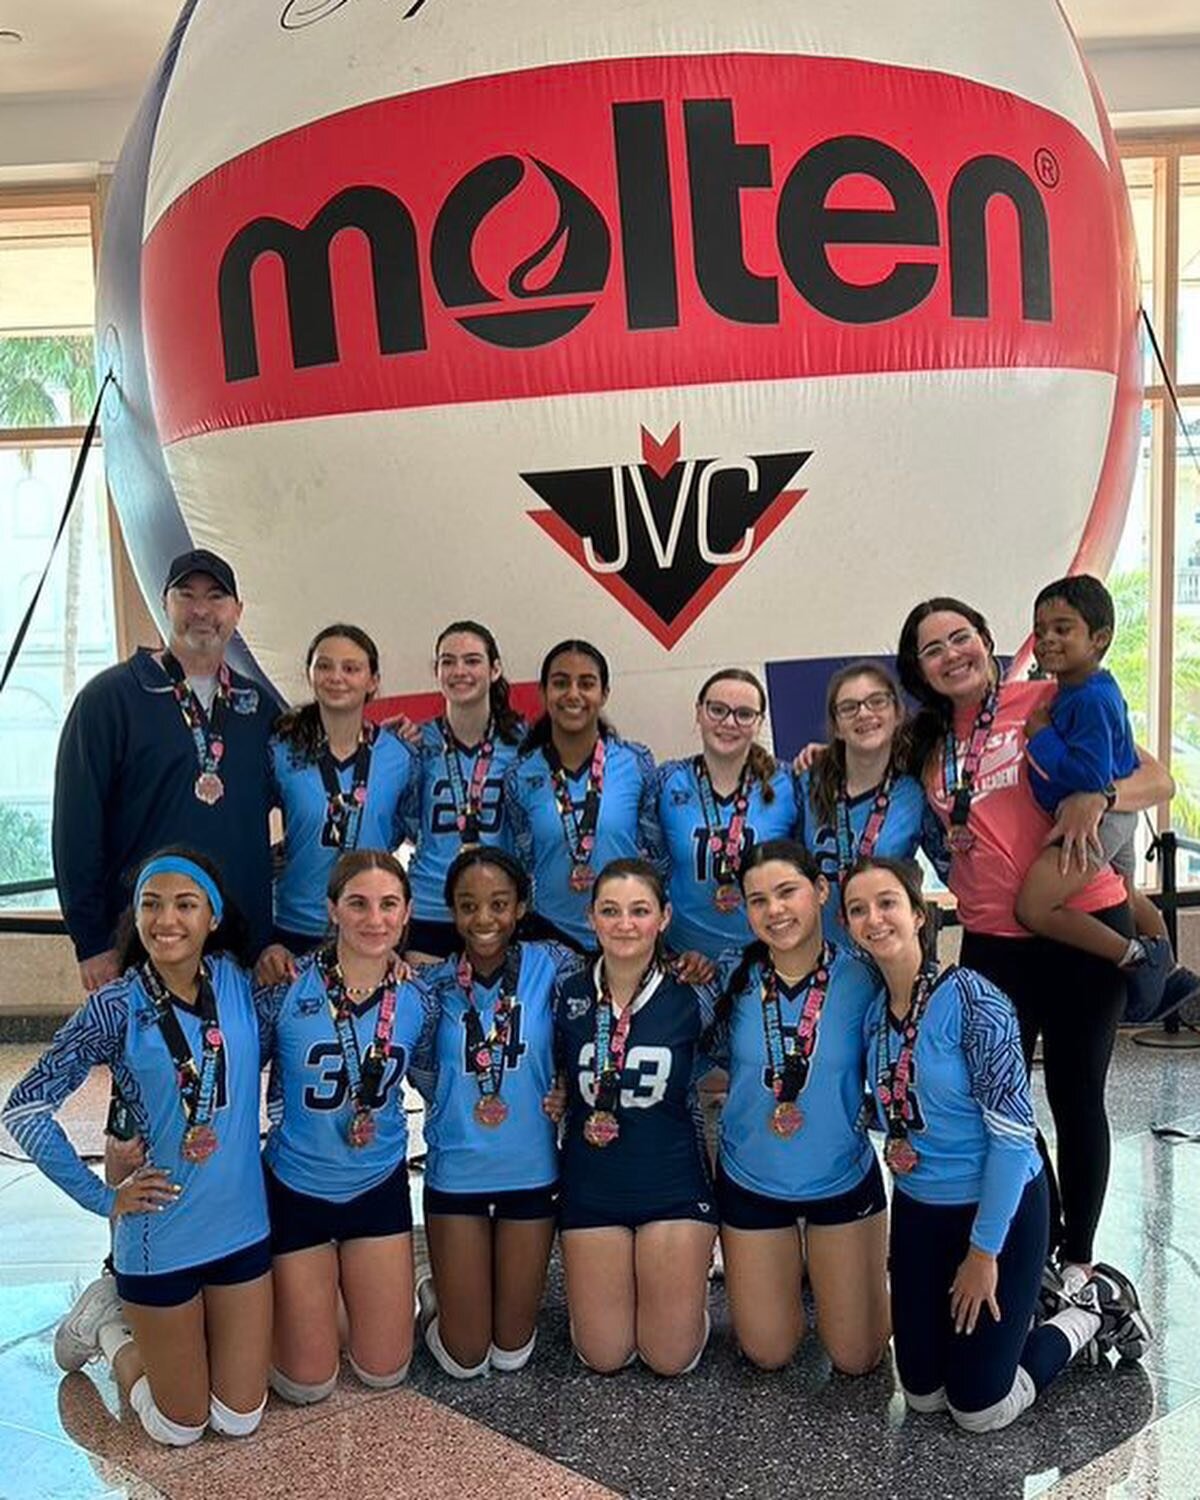 16 Yoli - 1st in Bronze at the @jvctournaments Tampa Slam 👏👏 This is the team&rsquo;s third medal finish this season! It&rsquo;s not about how you start - it&rsquo;s about how you finish!! Keep improving ladies 💕